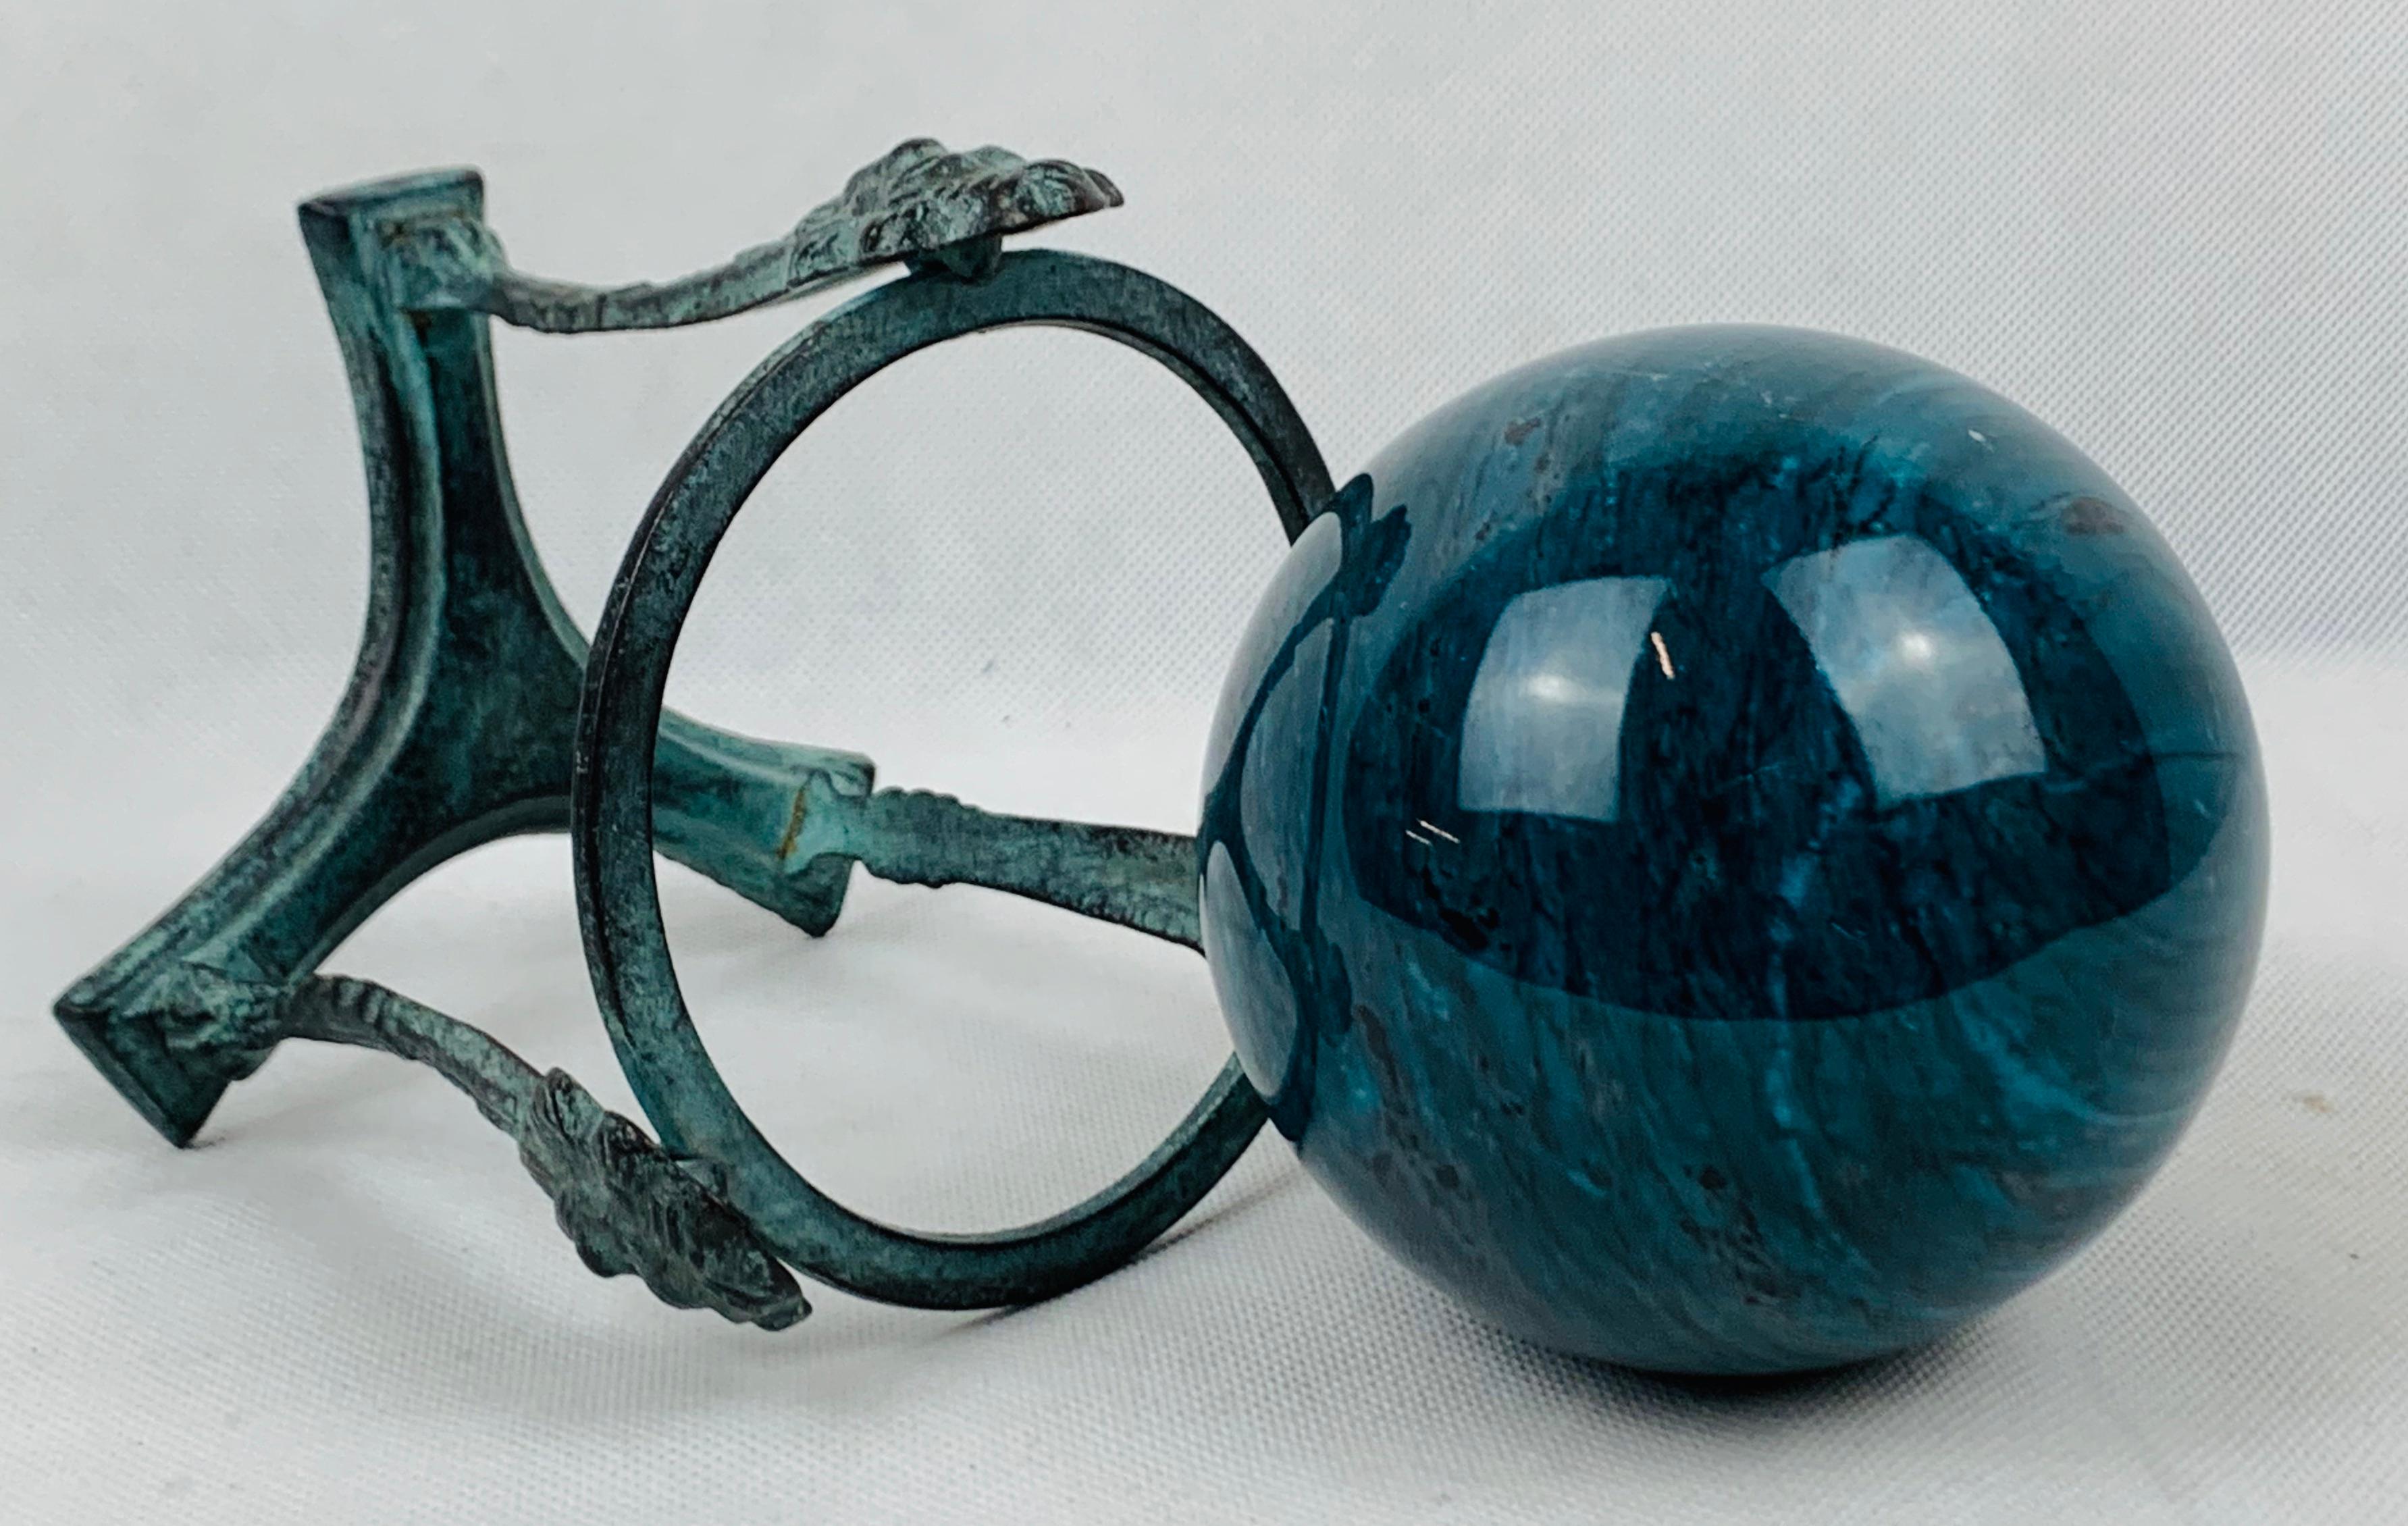 Metal Blue Marble Orb or Sphere-Neo-Classical Patinated Tripod Stand with Lion's Faces